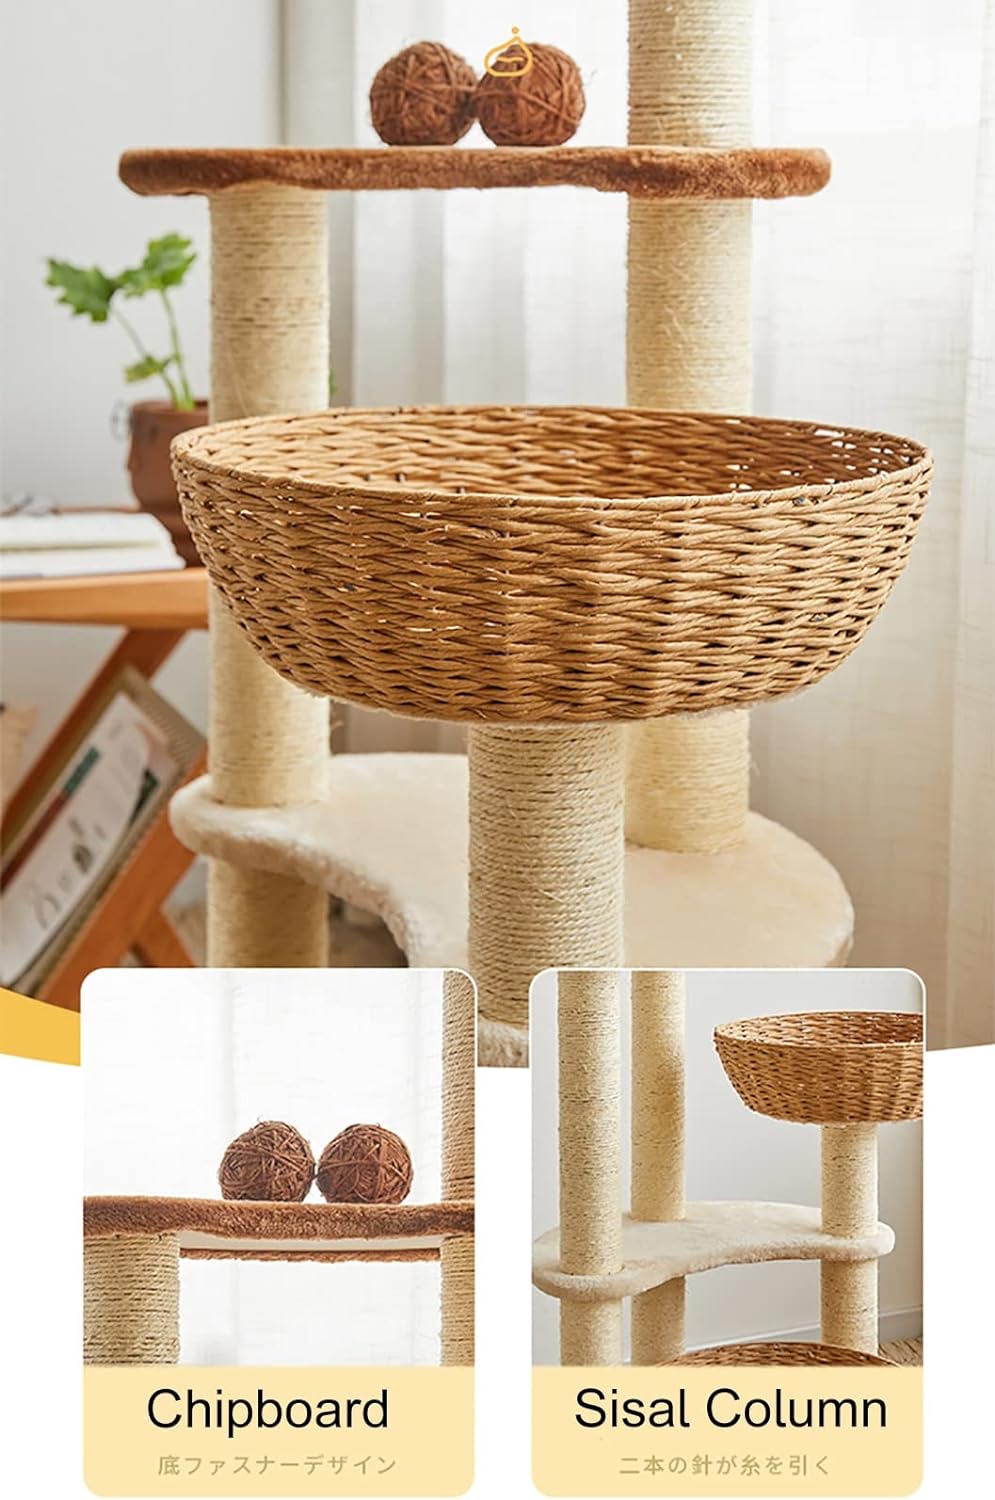 Cat Tree Hand-Knit Tower | Cat Toy